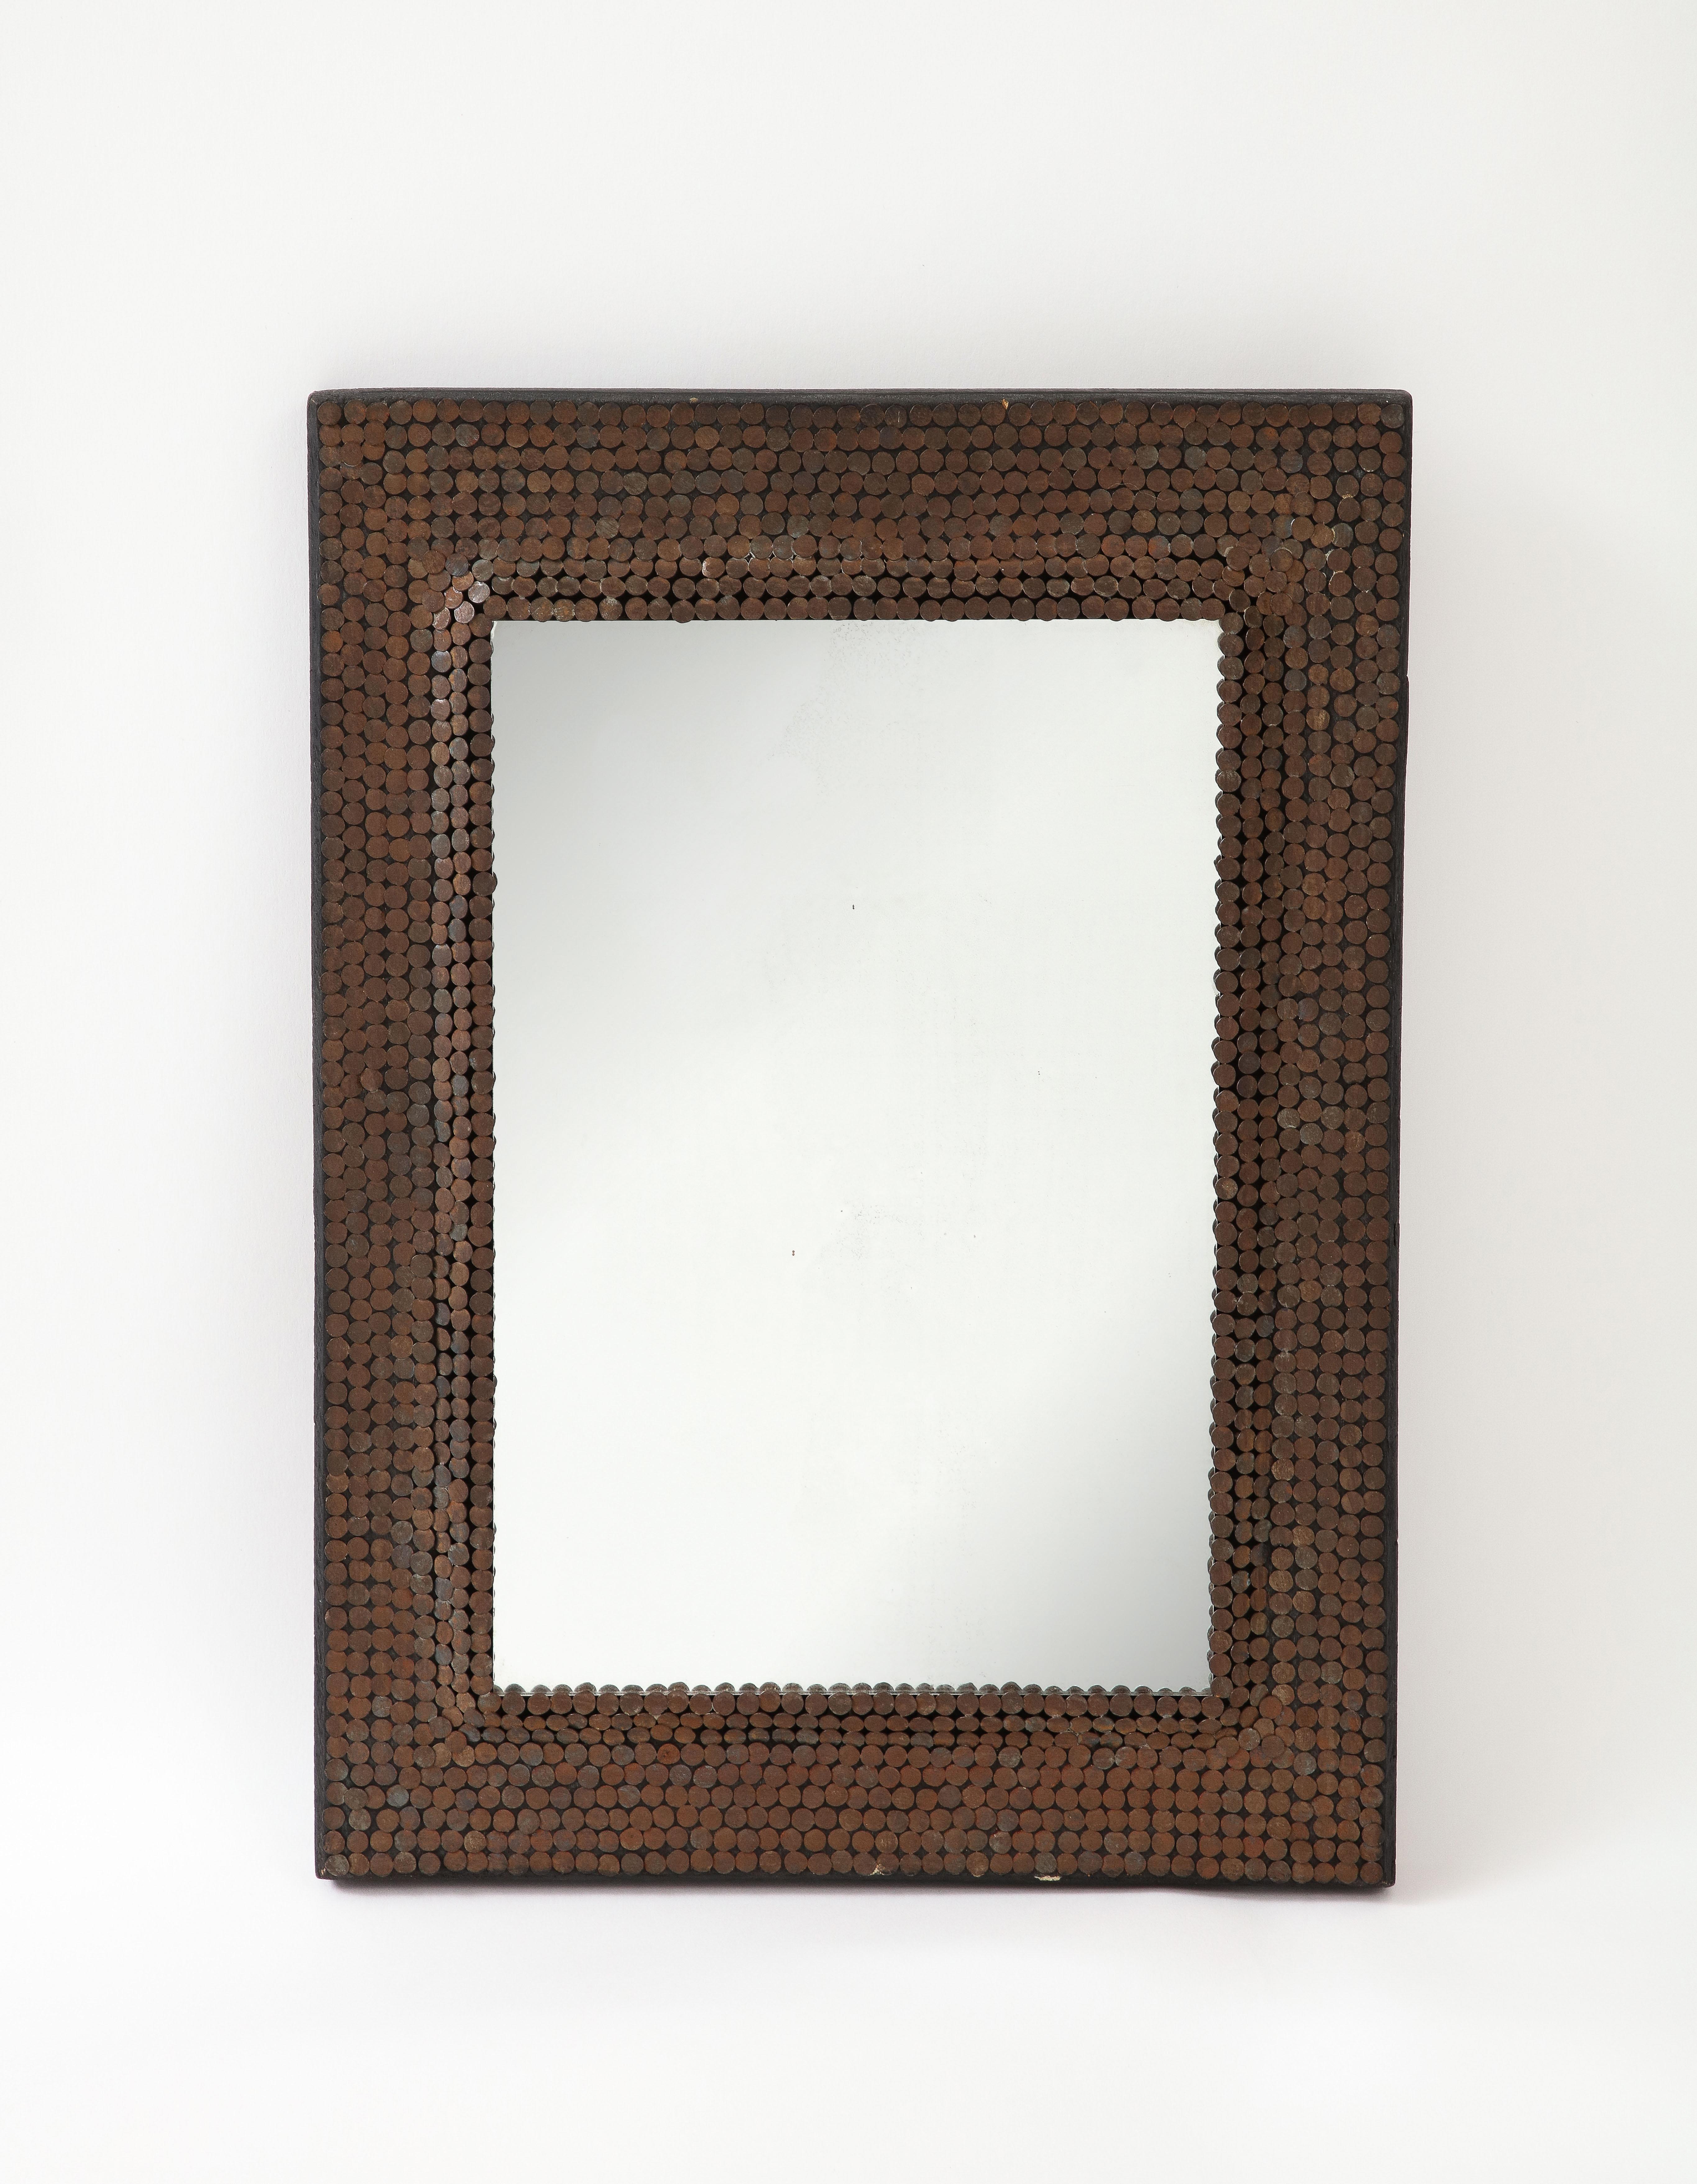 Early 20th C. Hand Made Mirror Studded with Nails, France
H: 16.5 W: 11.75 D: 1 in.

Hand Made of Nails